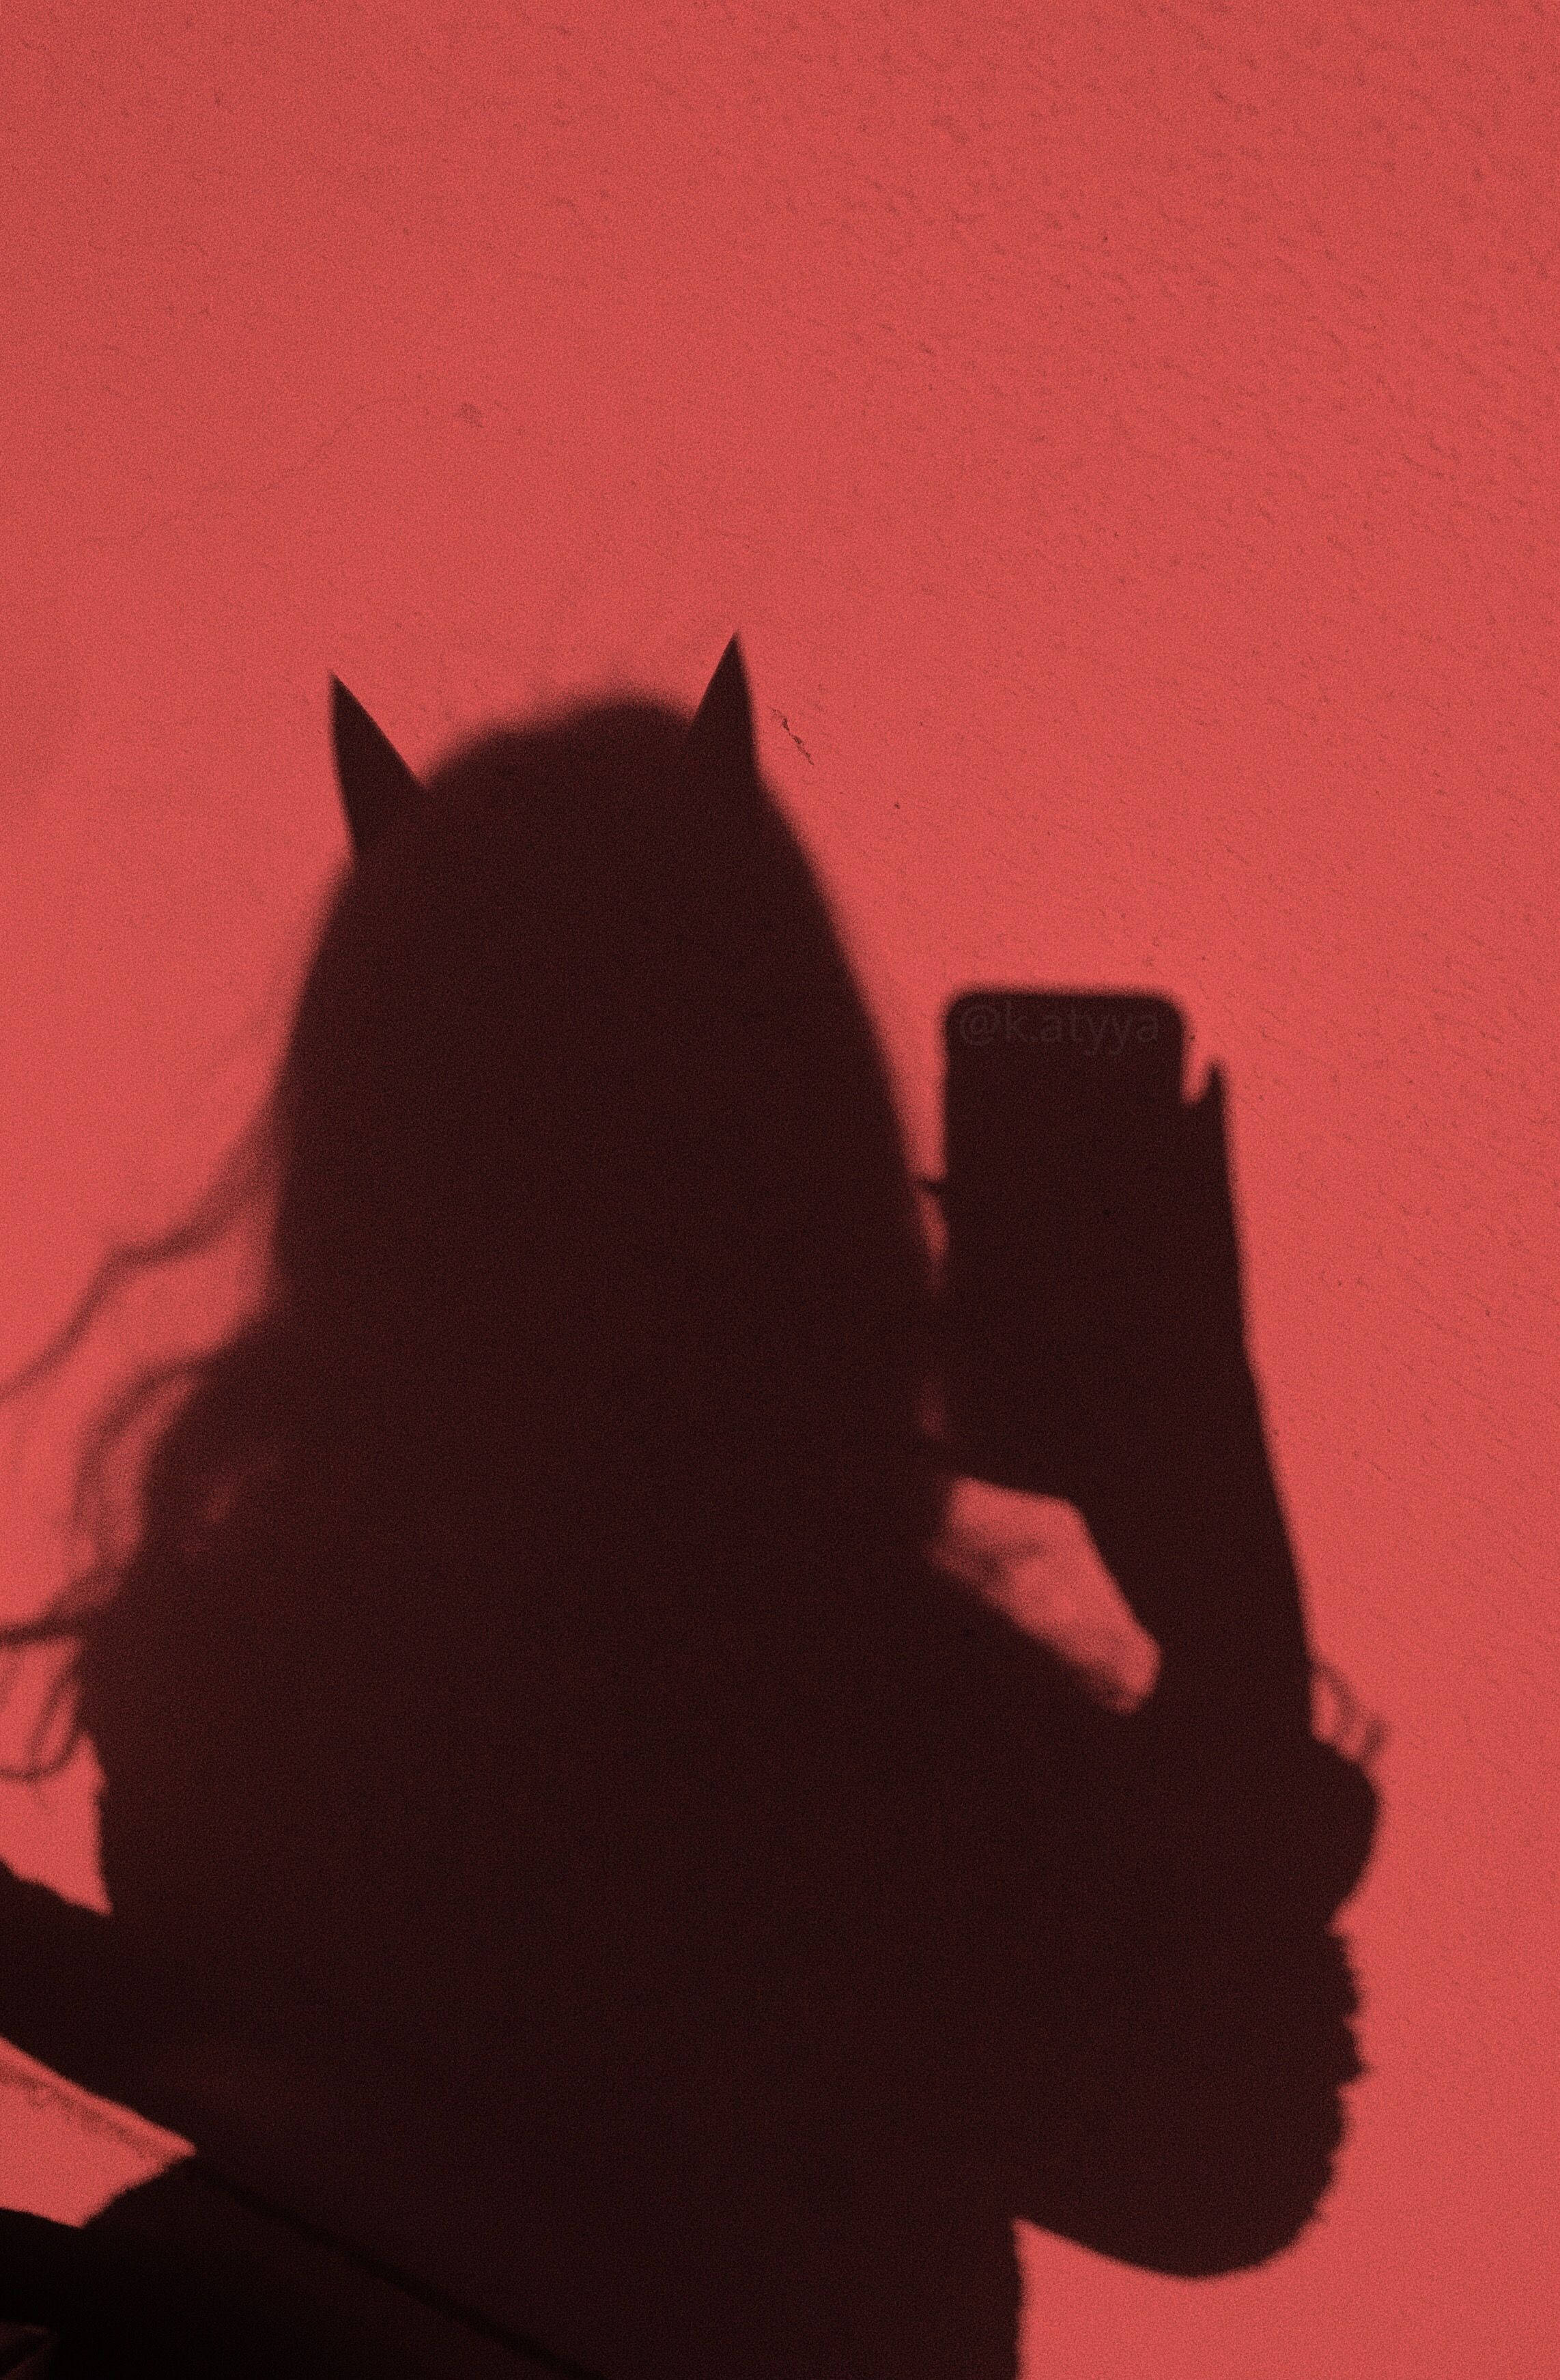 A woman taking her picture in the dark - Shadow, profile picture